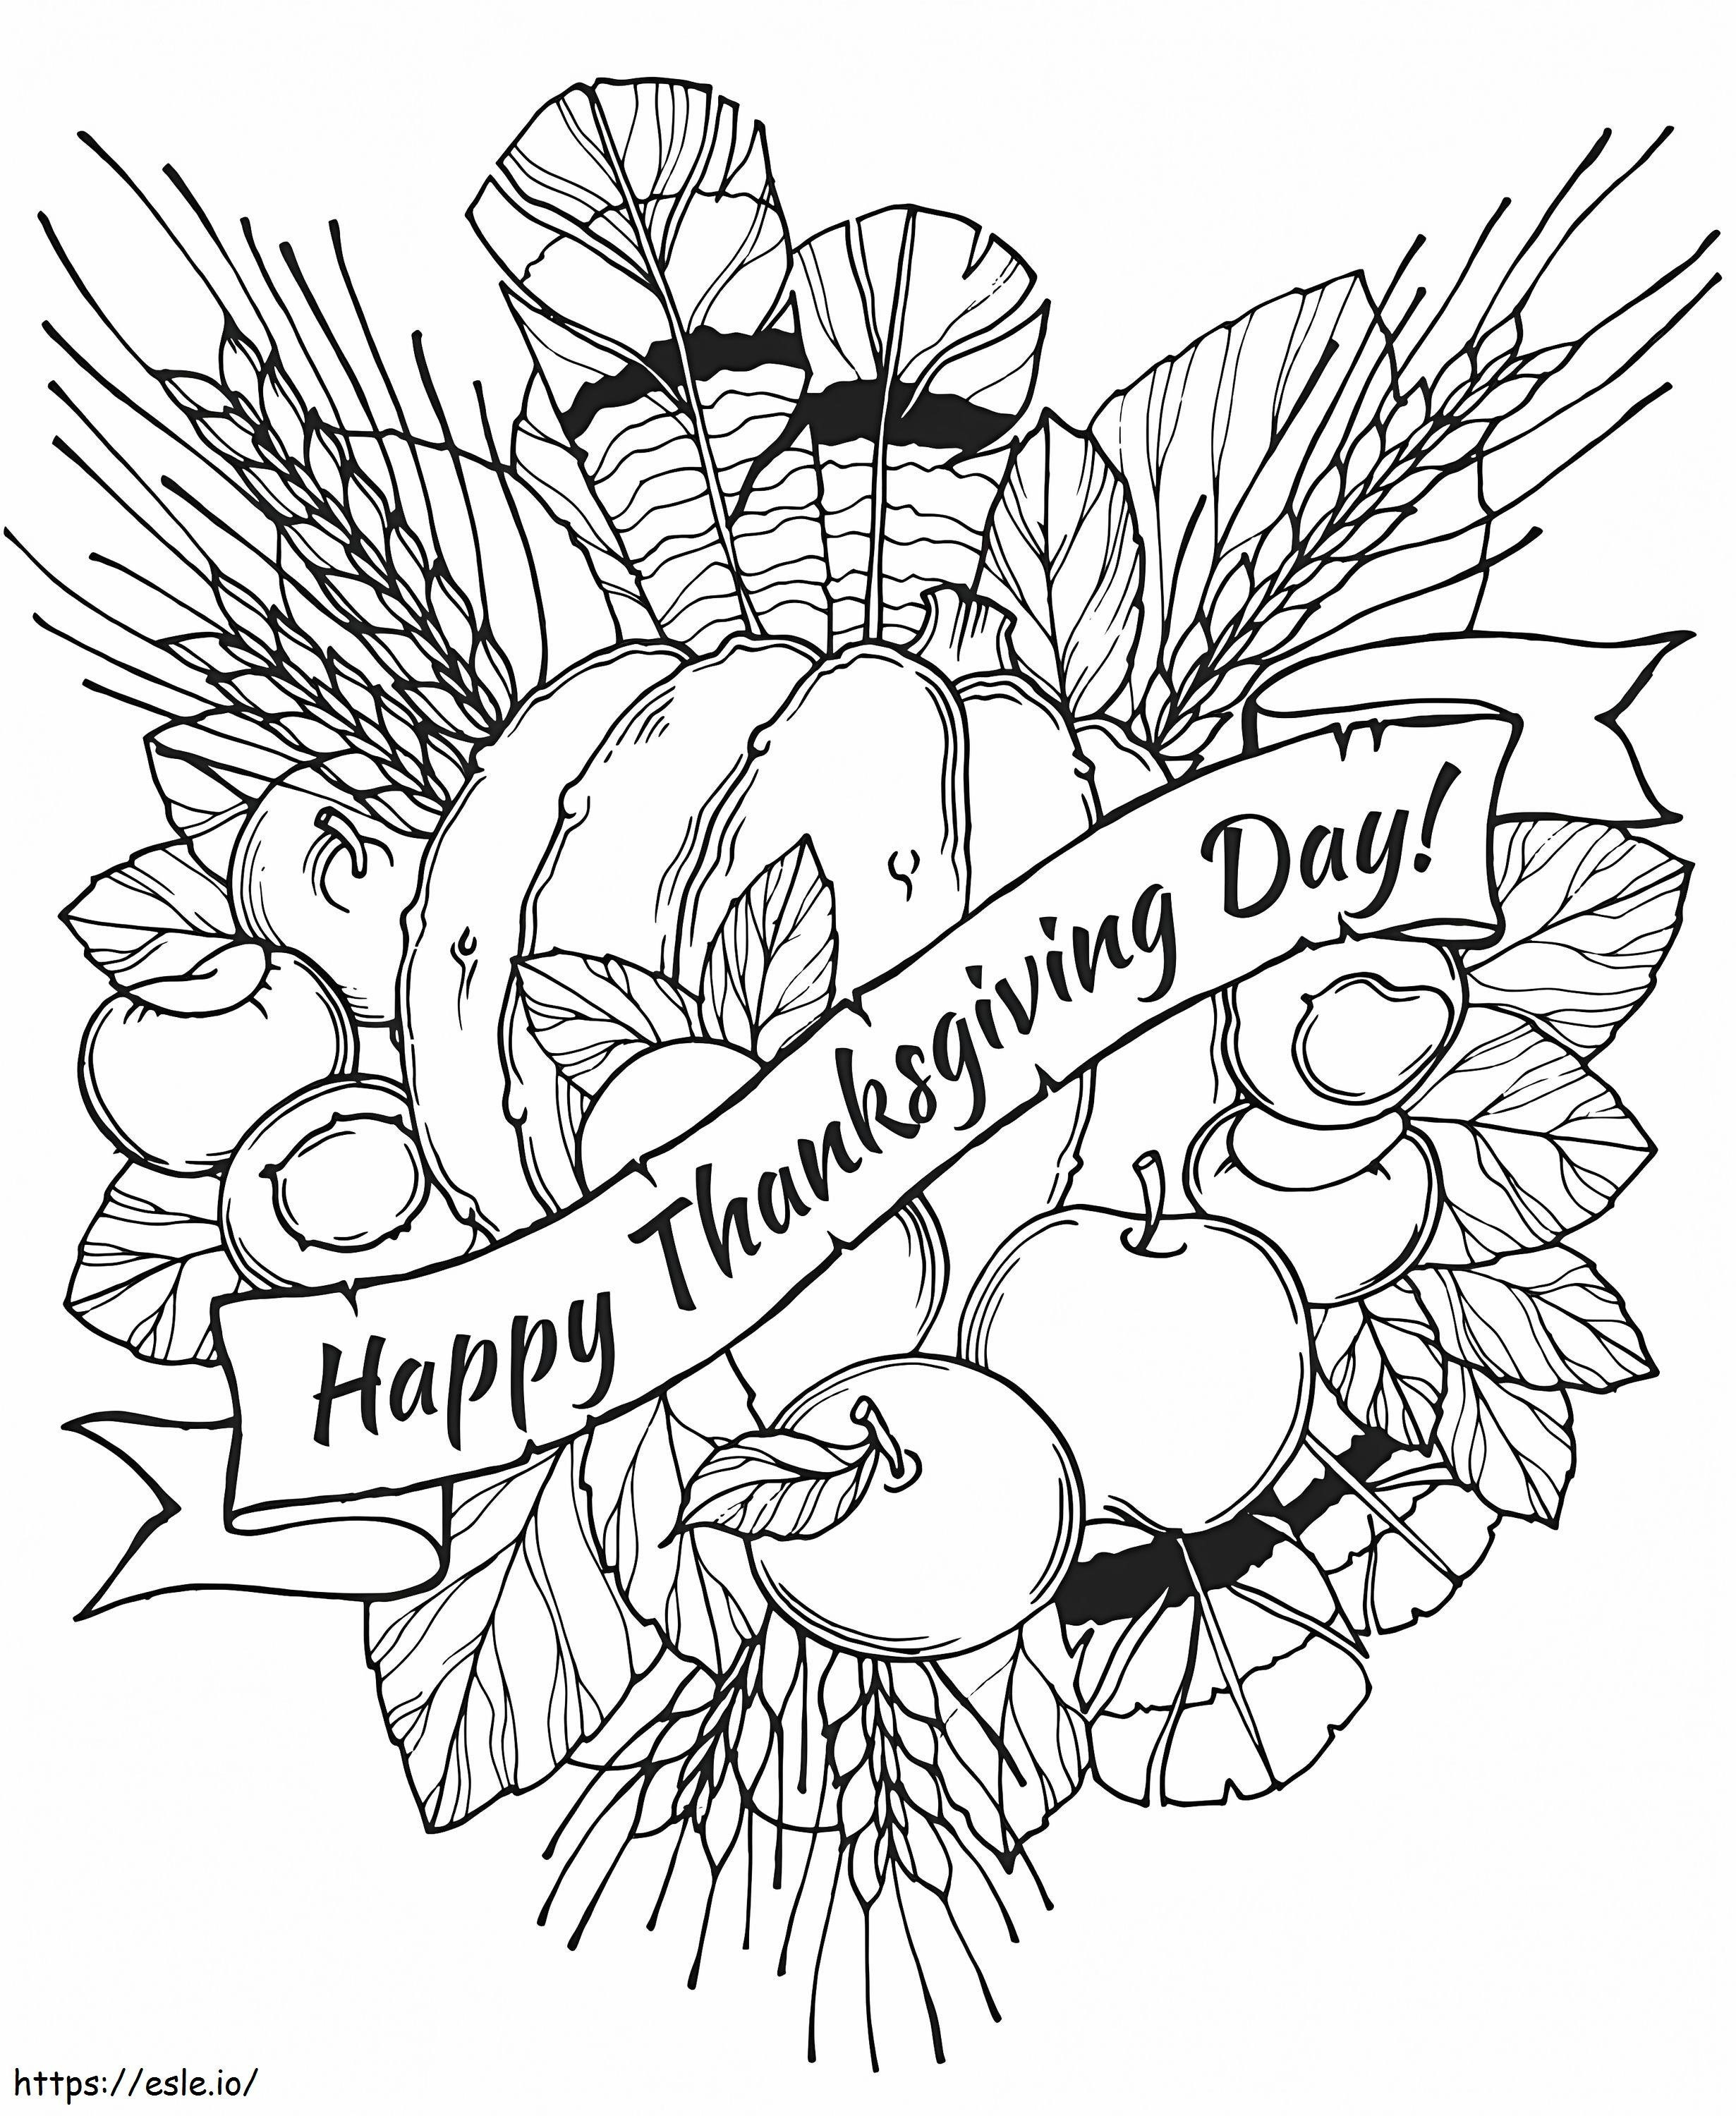 1588579705 Coloring Adult Happy Thanksgiving coloring page